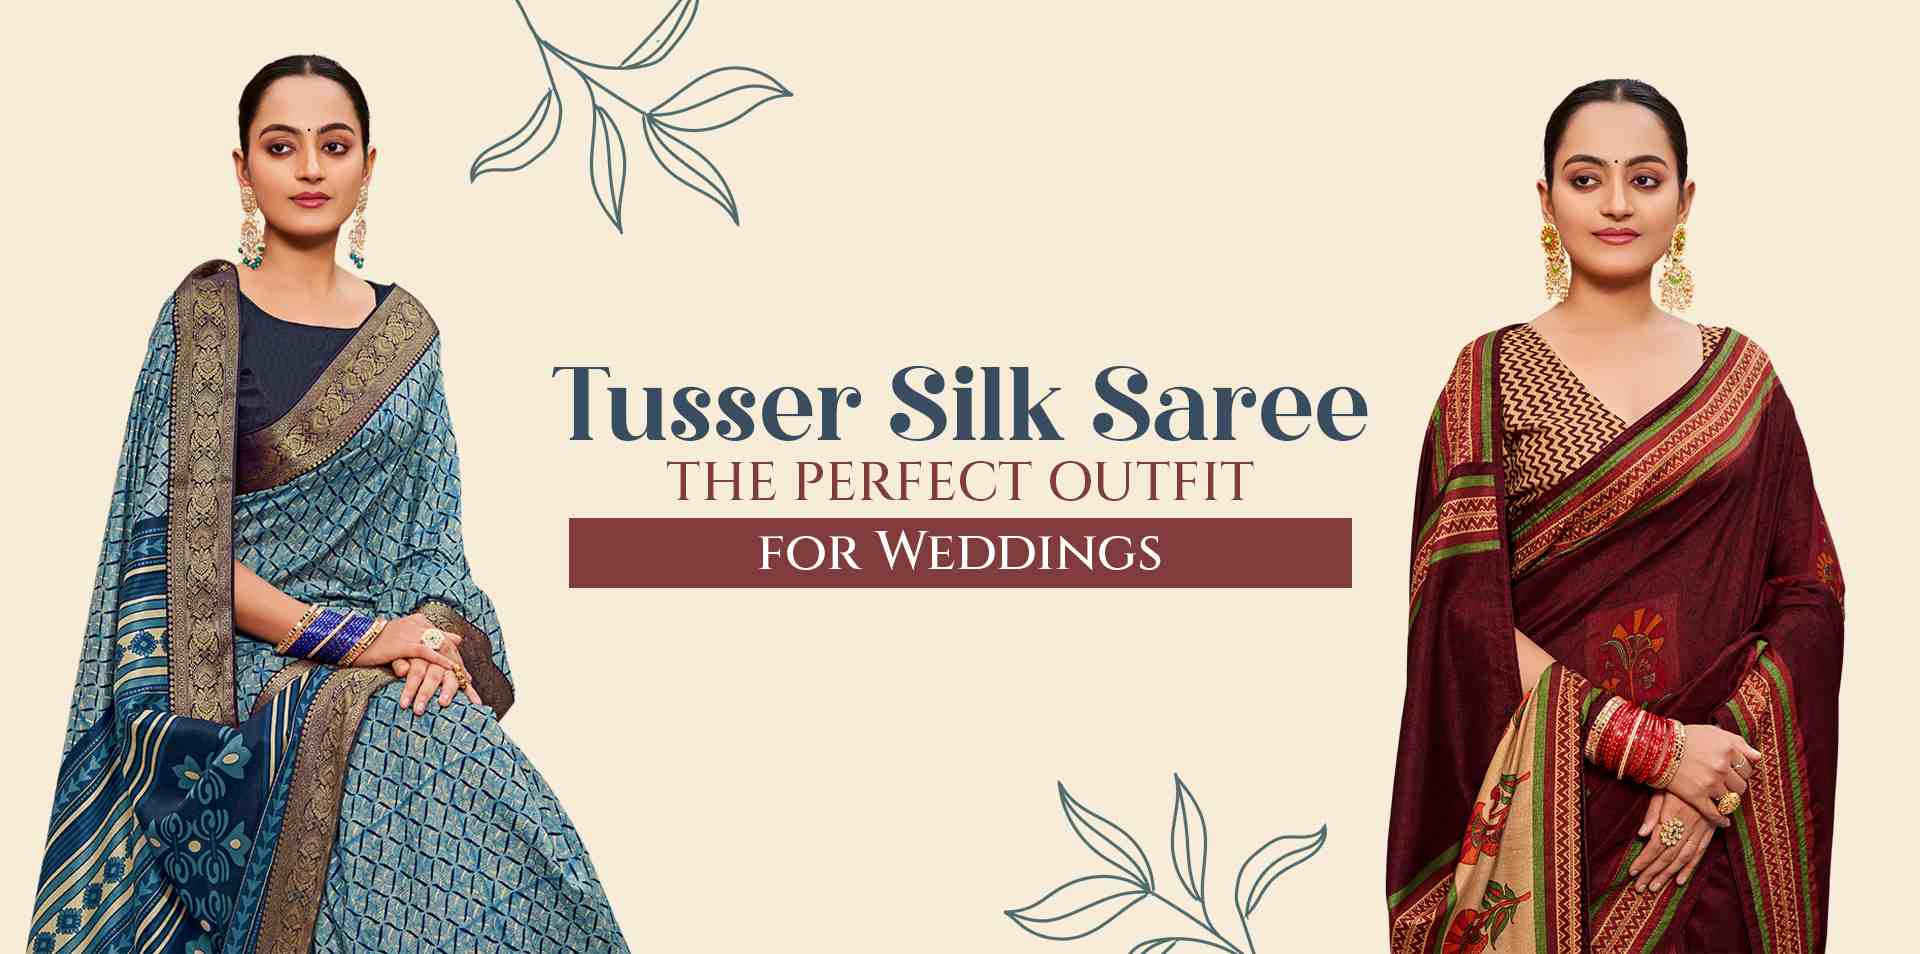 Tusser Silk Saree: The Perfect Outfit for Weddings